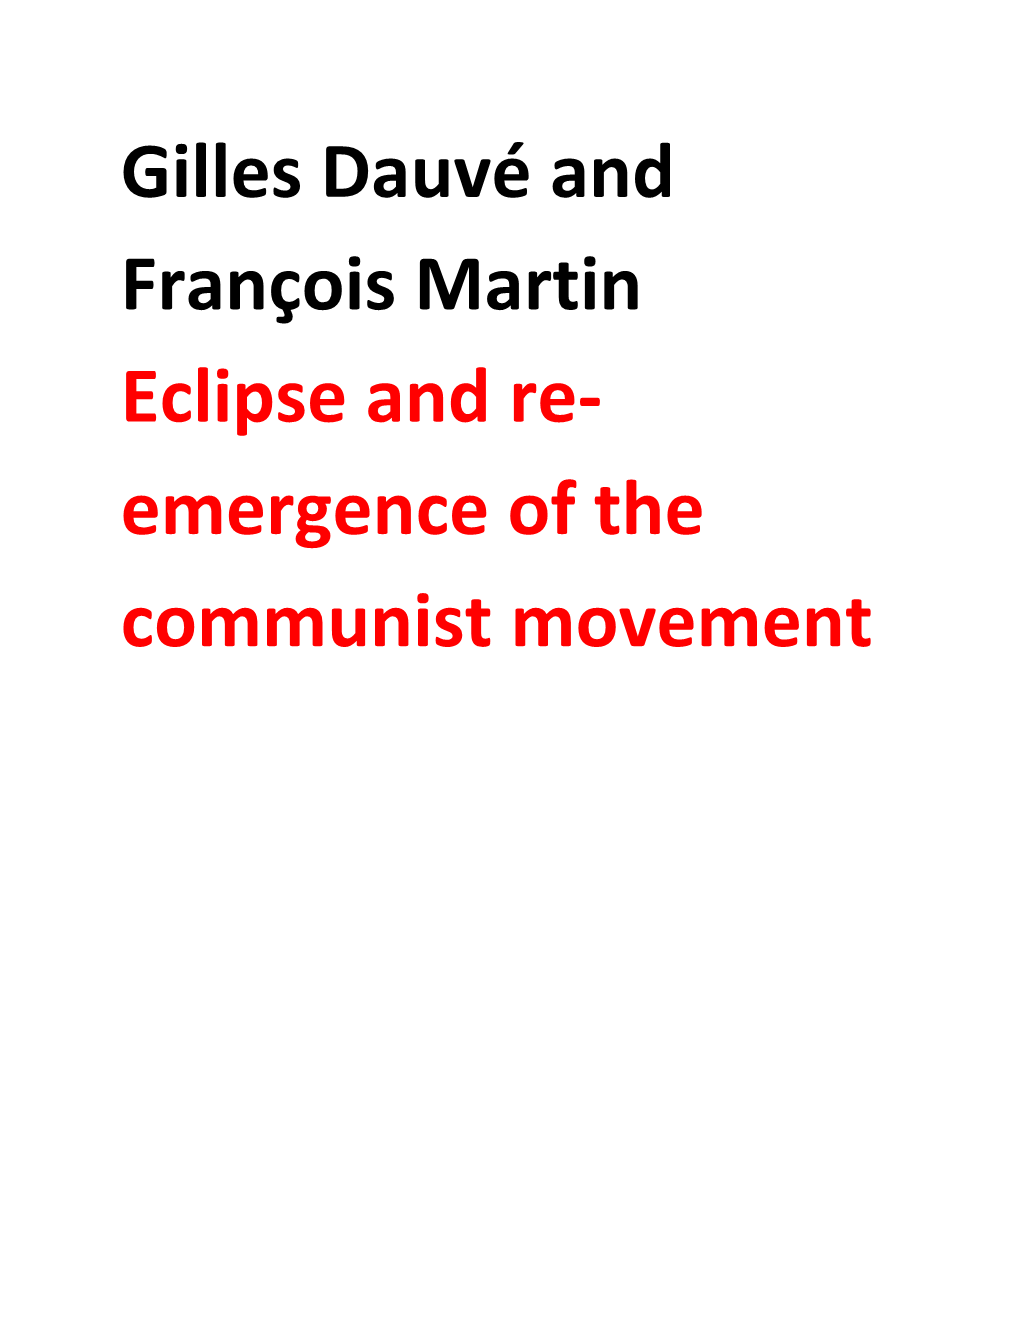 Emergence of the Communist Movement